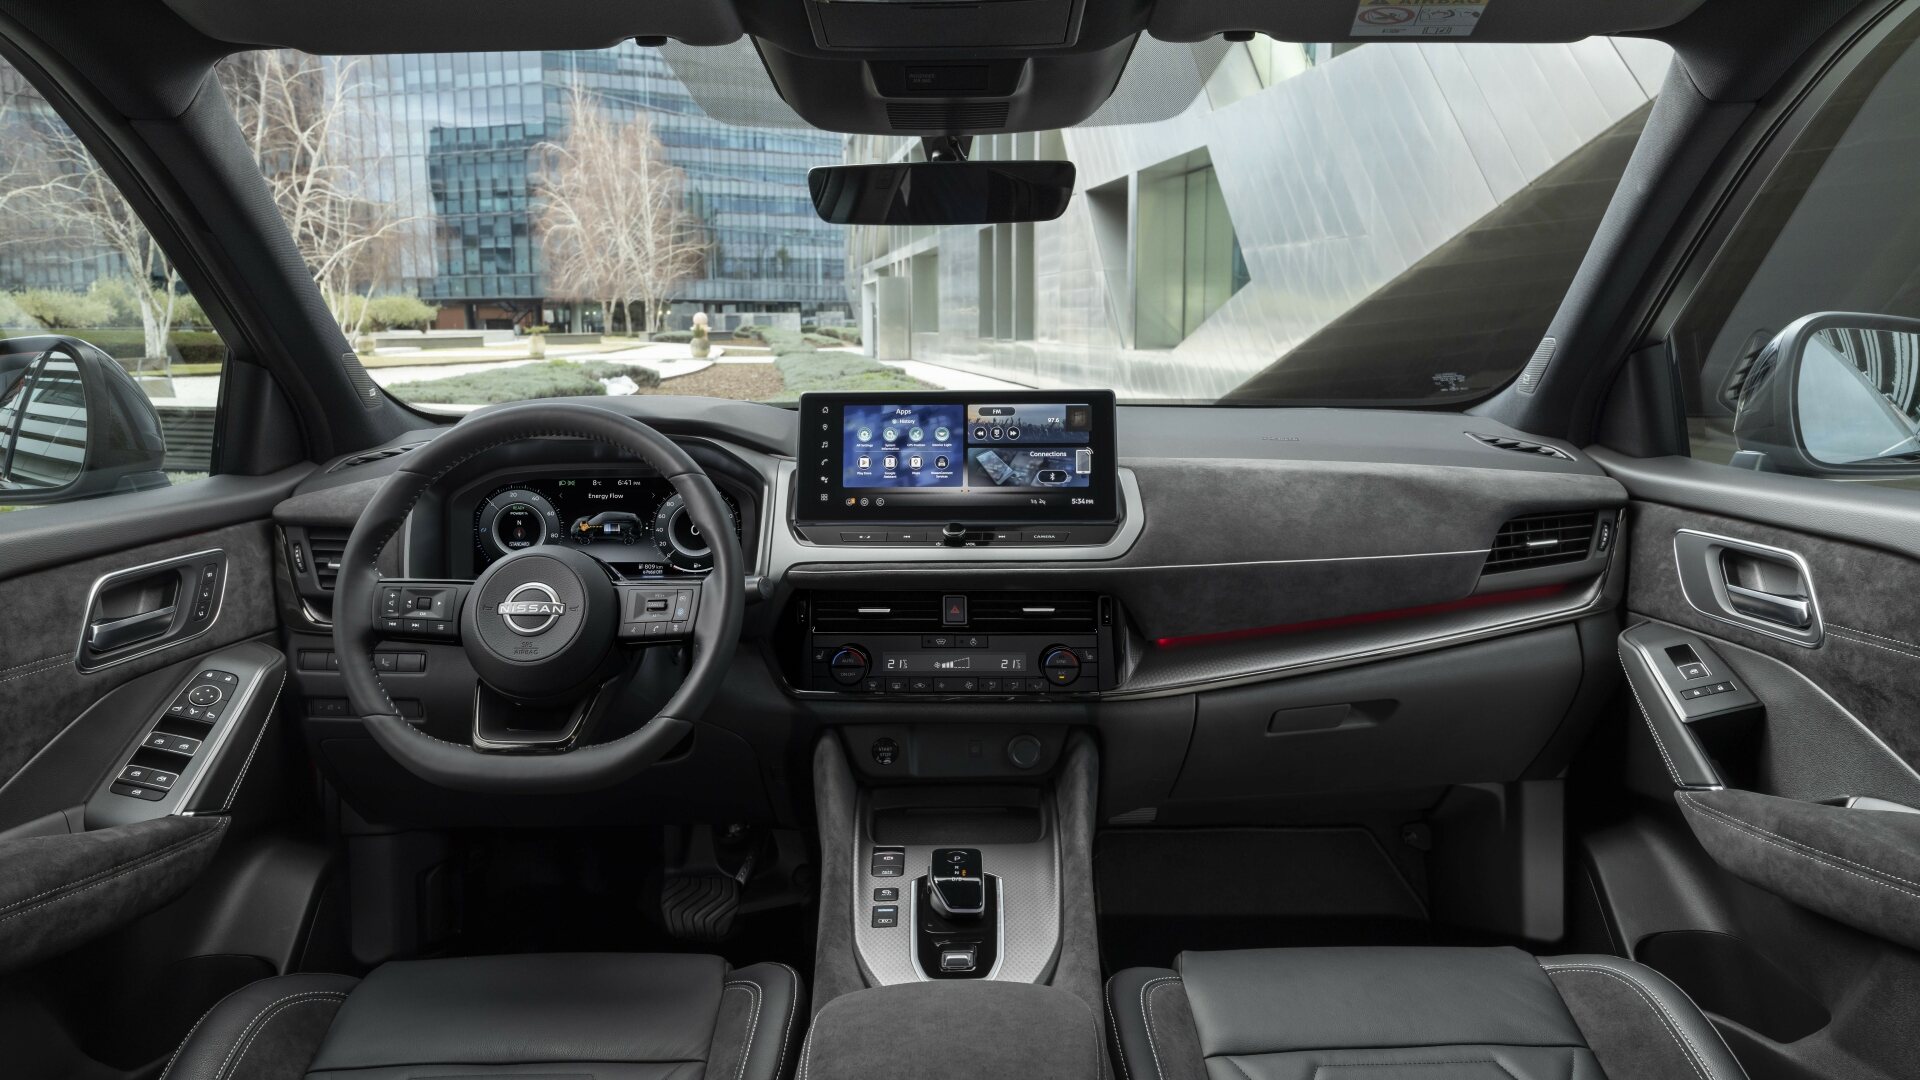 The Interior, Steering, Dashboard, And Central Console Of A New Qashqai (Credits Nissan Newsroom Europe)